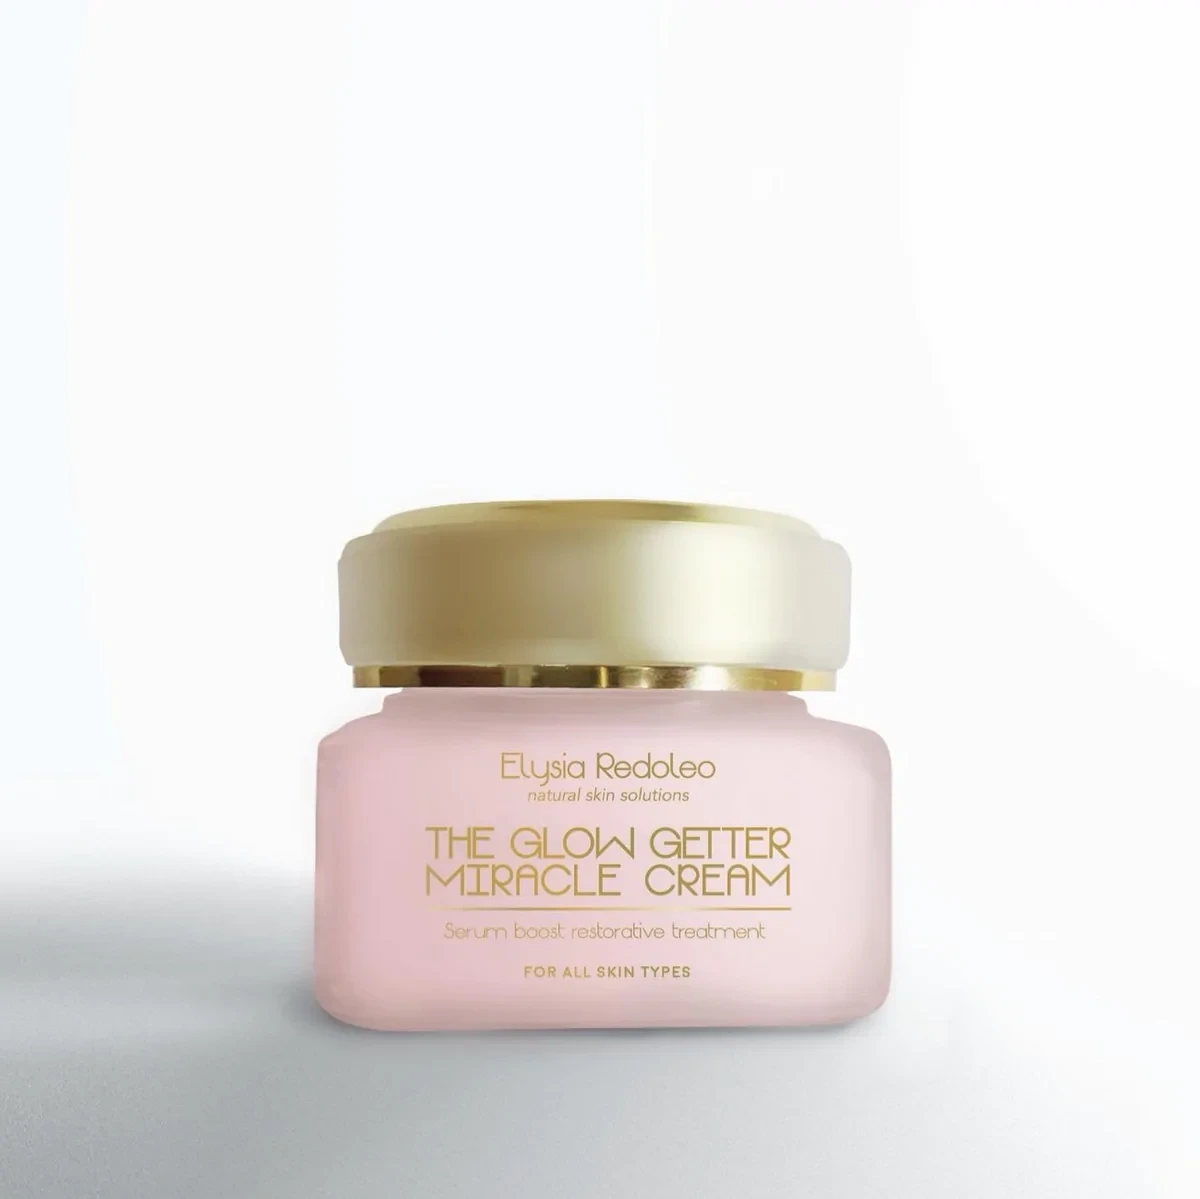 The Glow Getter Miracle Cream 綠藻多功能修復奇蹟霜